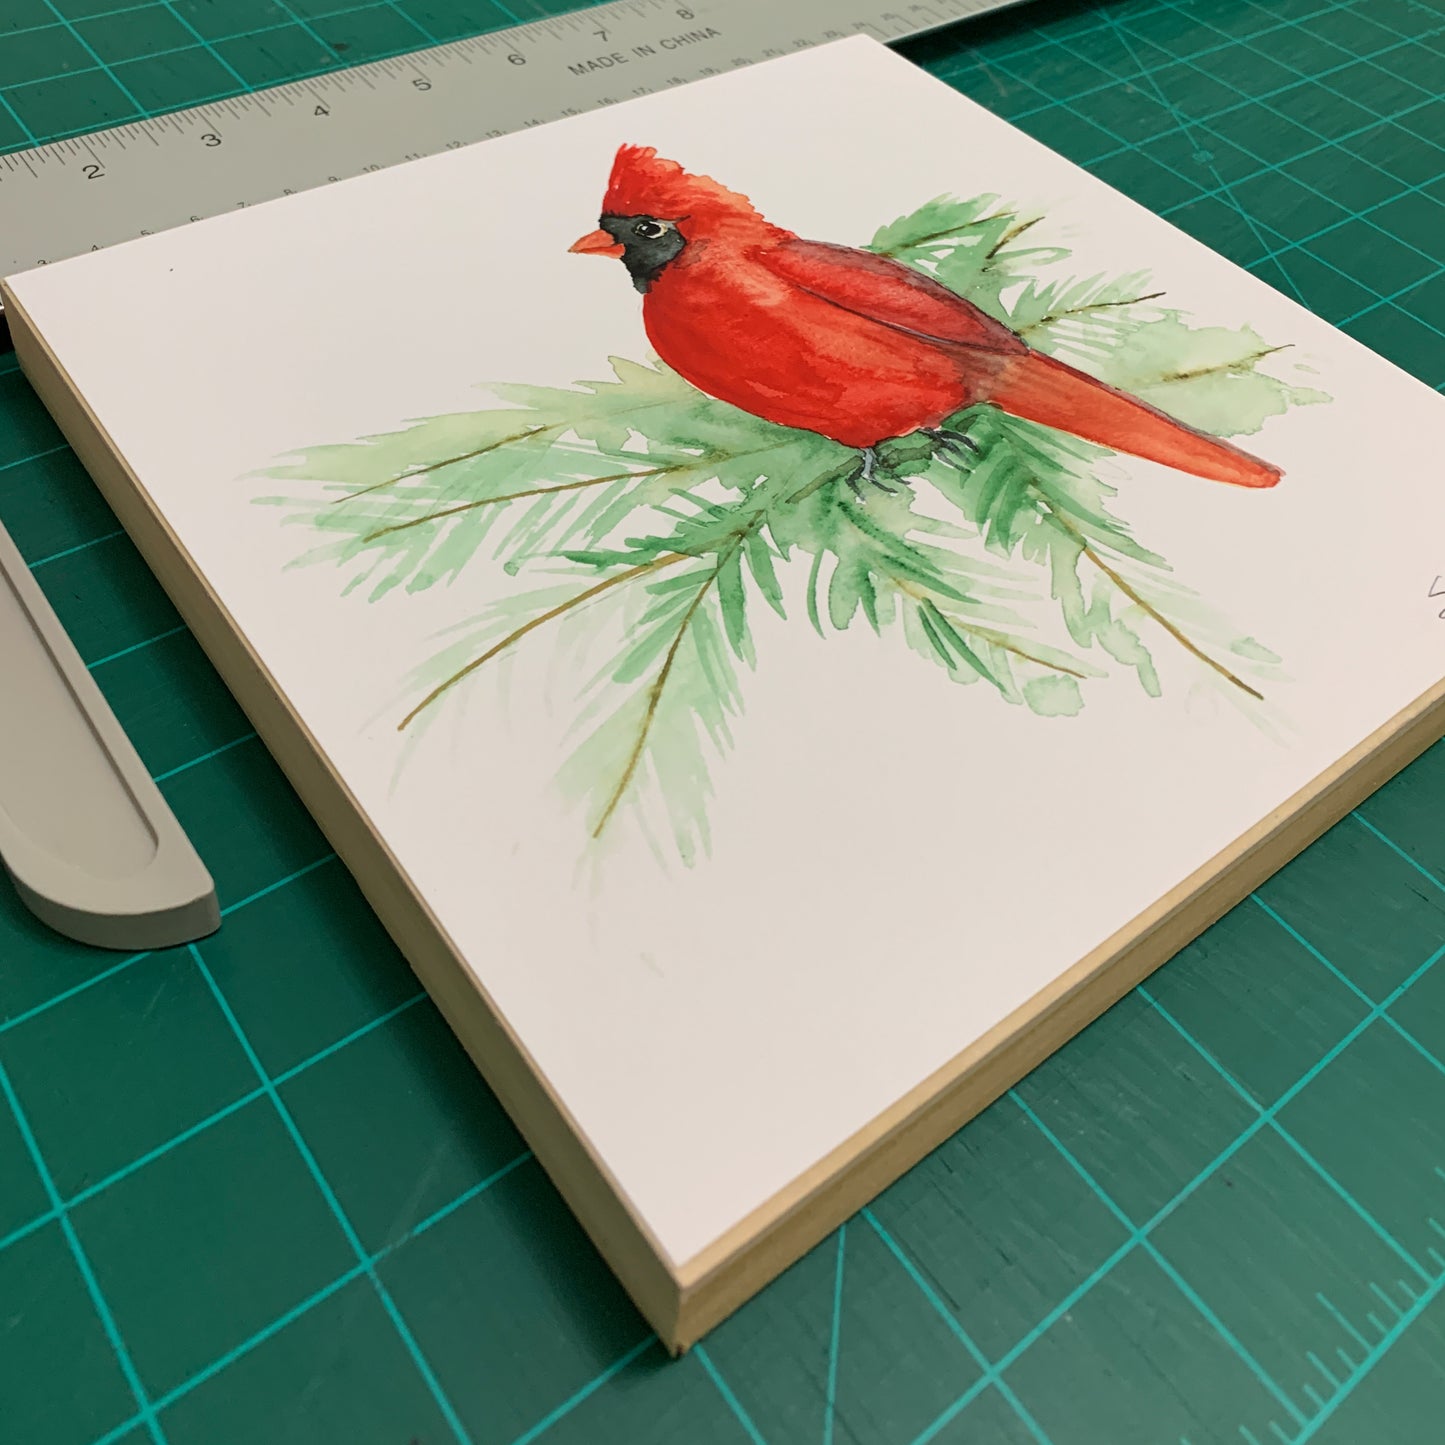 Cardinal - Red Bird - Watercolor on Wood Panel - Flamingo Shores - Original Art for Home Decor and Gifts